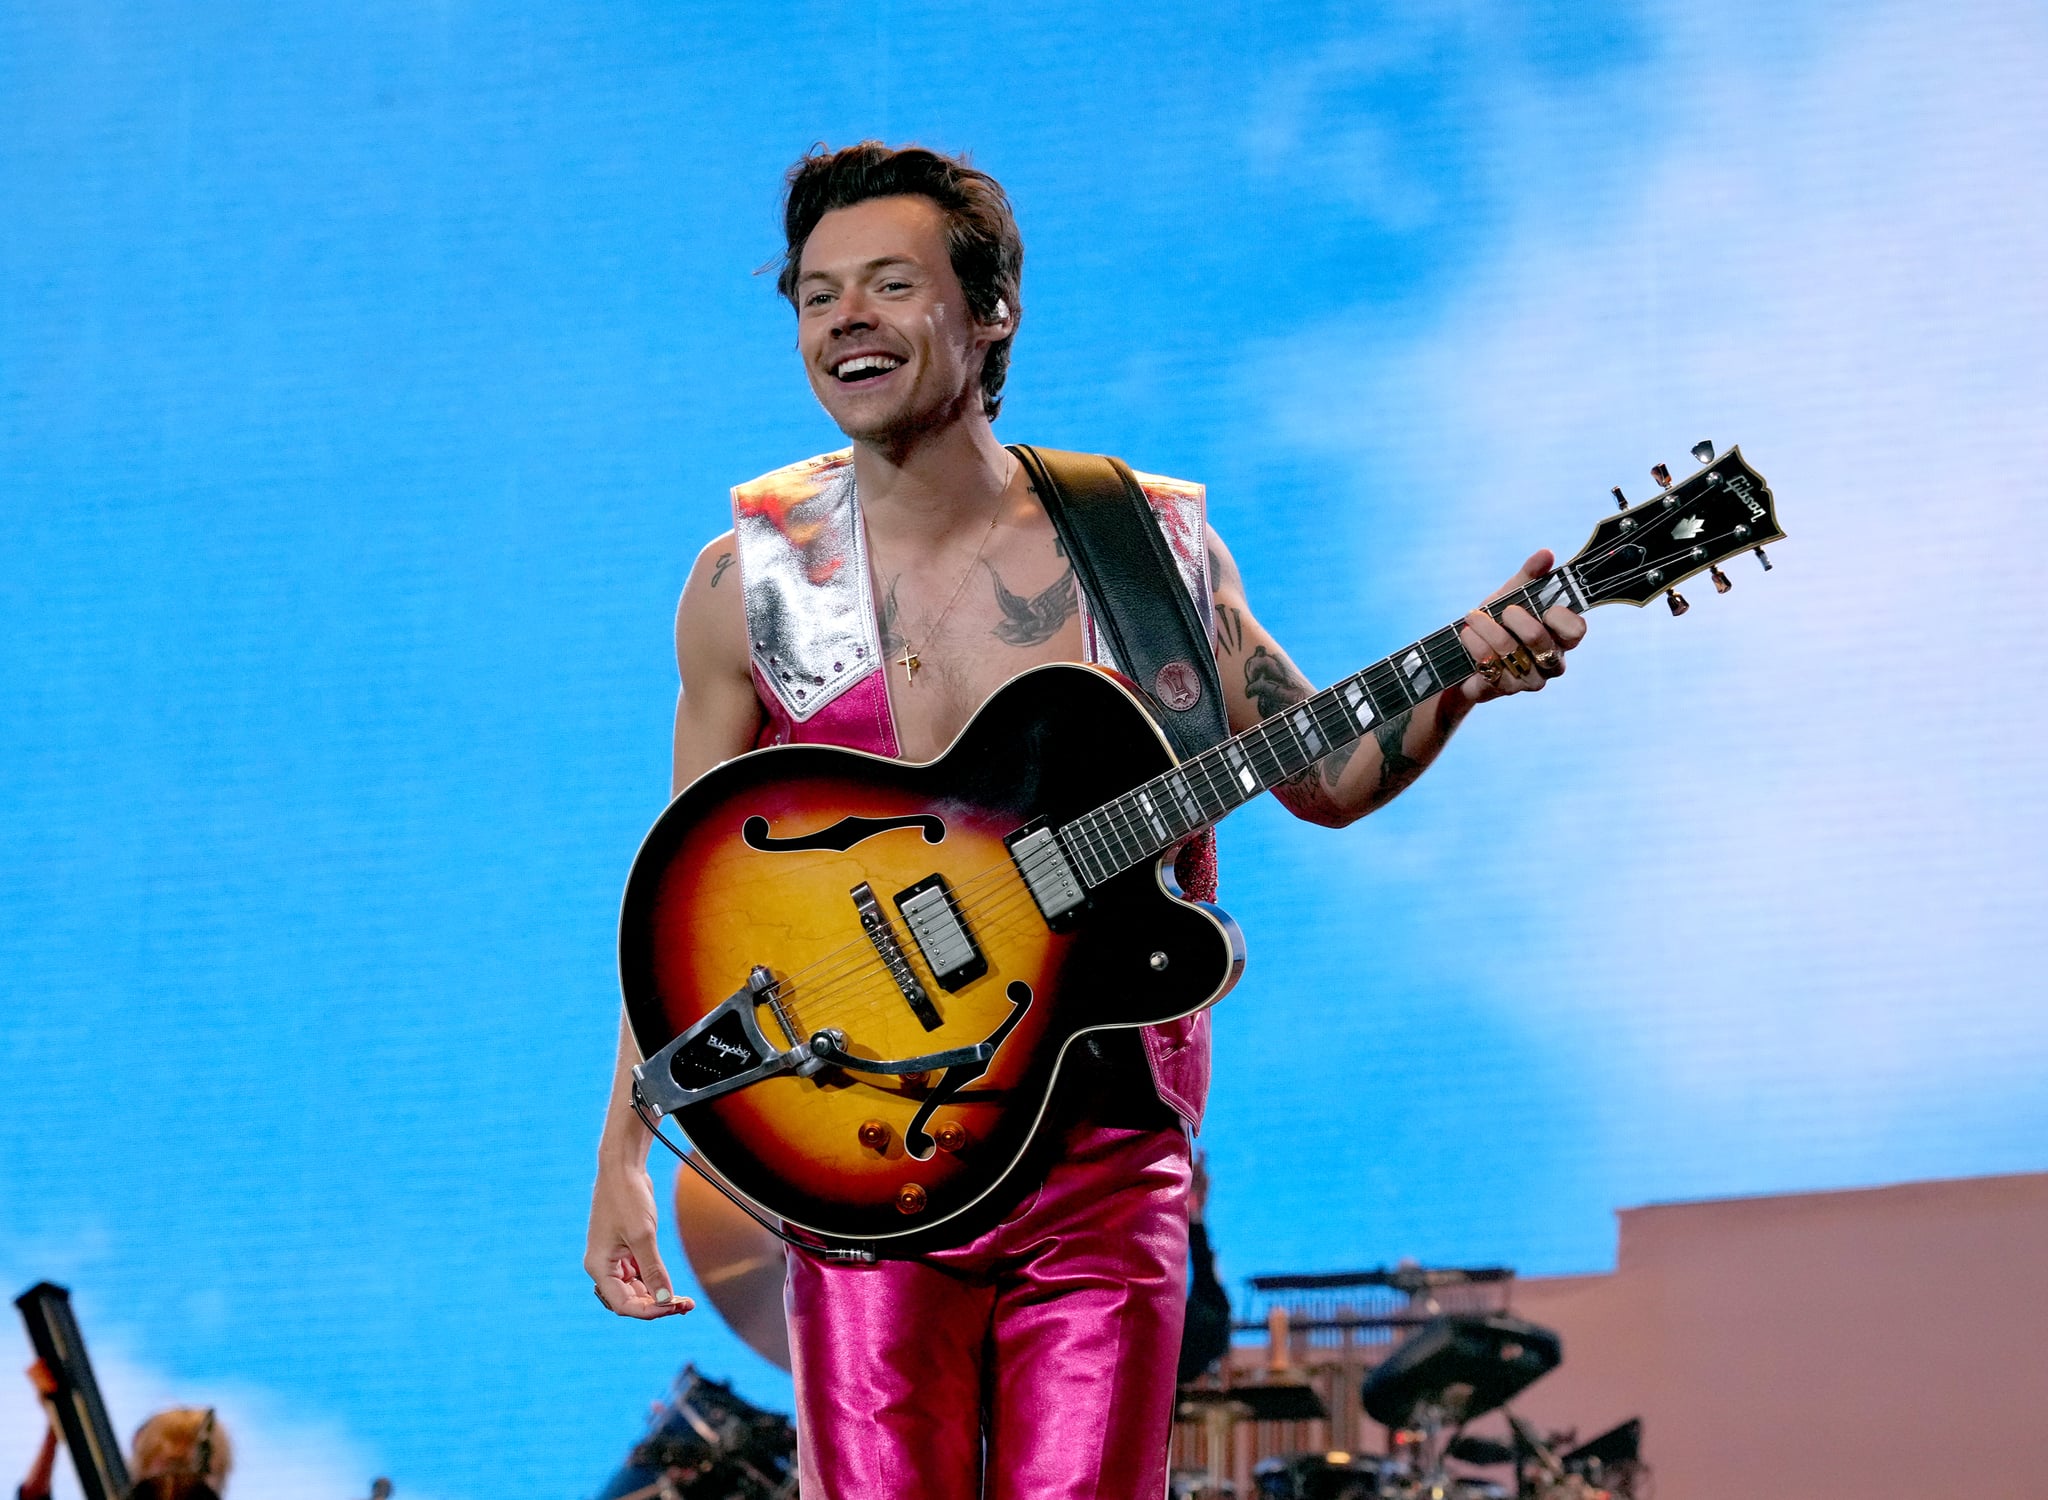 INDIO, CALIFORNIA - APRIL 22: Harry Styles performs onstage at Coachella during the 2022 Coachella Valley Music And Arts Festival on April 22, 2022 in Indio, California.  (Photo by Kevin Mazur/Getty Images for Harry Styles)